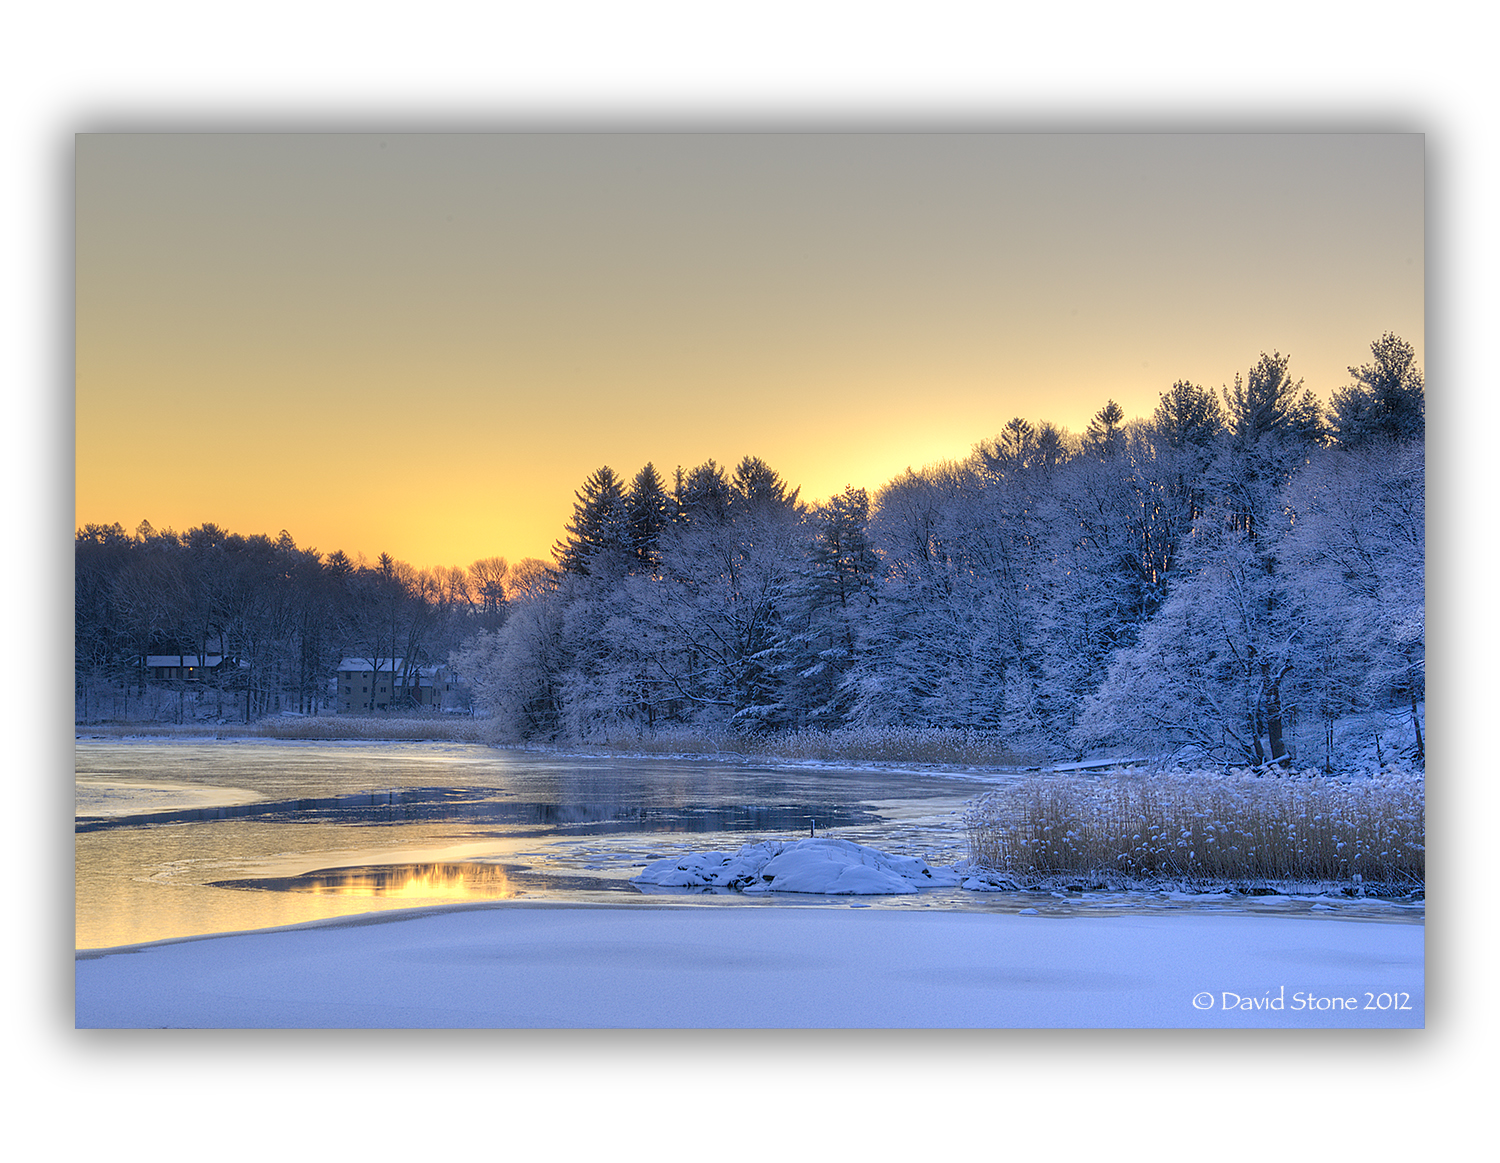 Winter Sunrise At Ipswich Town Landing (user submitted)